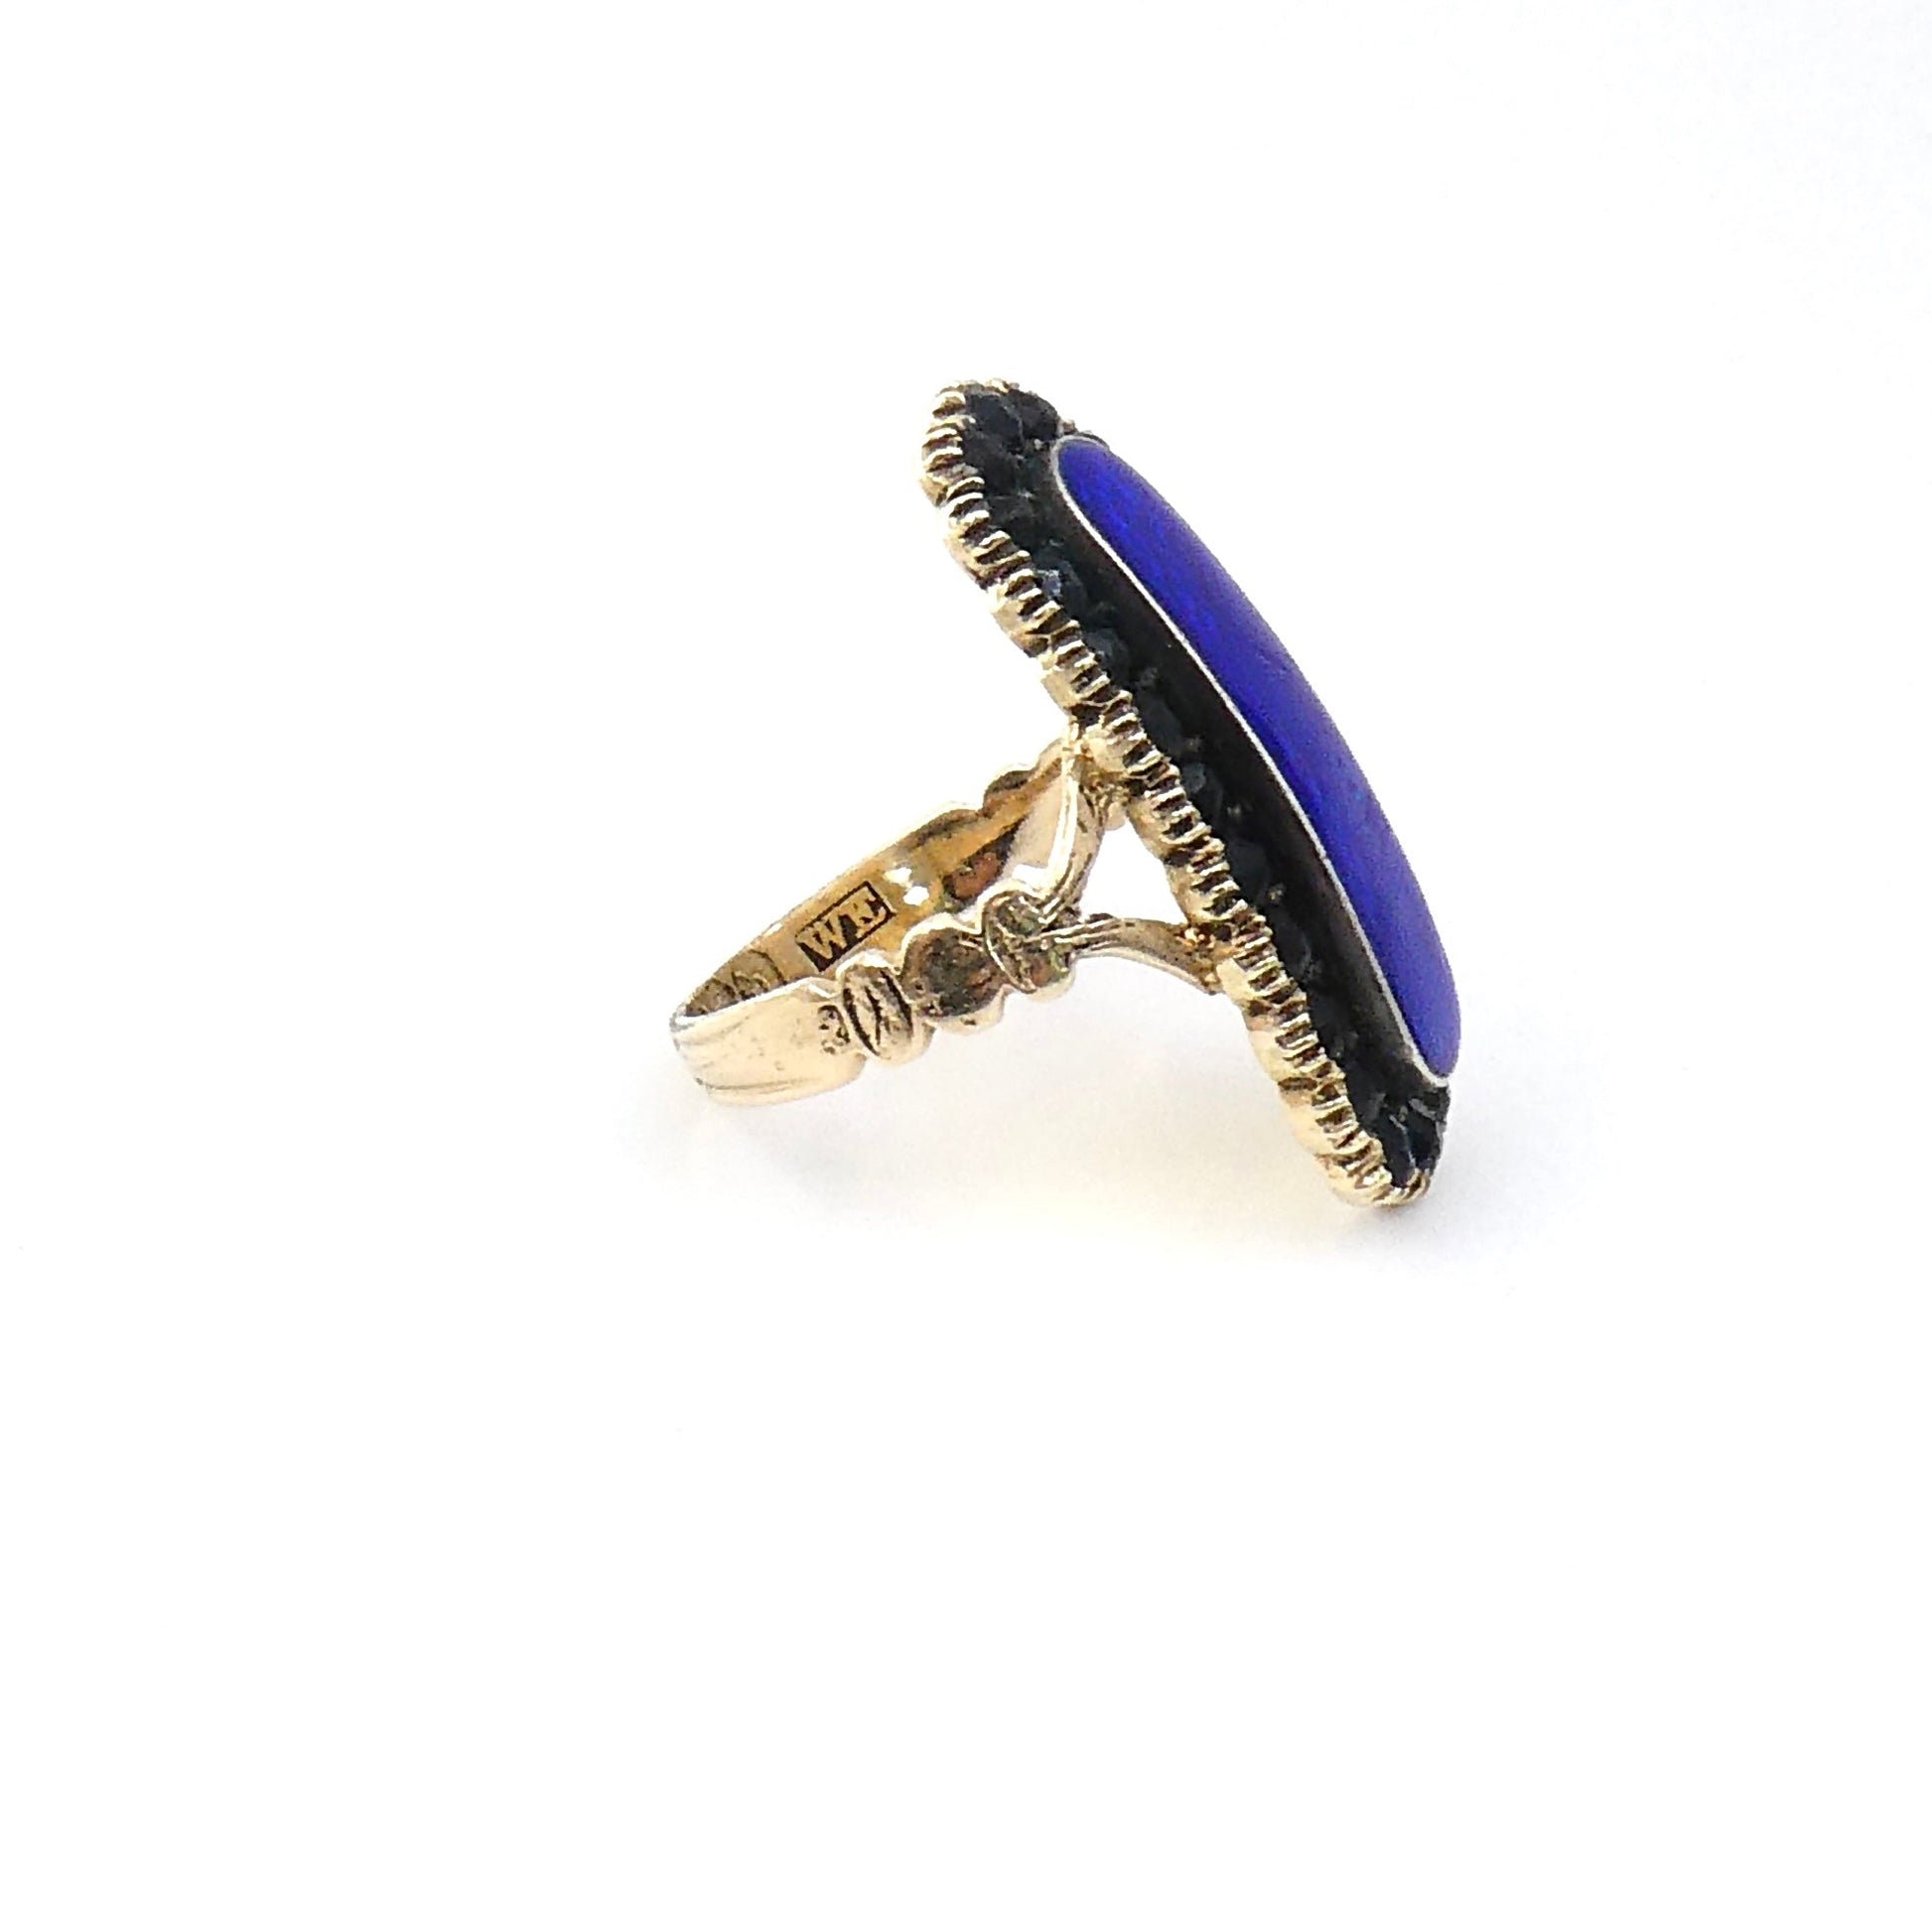 Antique blue enamel and jet ring, an adapted piece, a unique antique ring inscribed 1822 - Collected